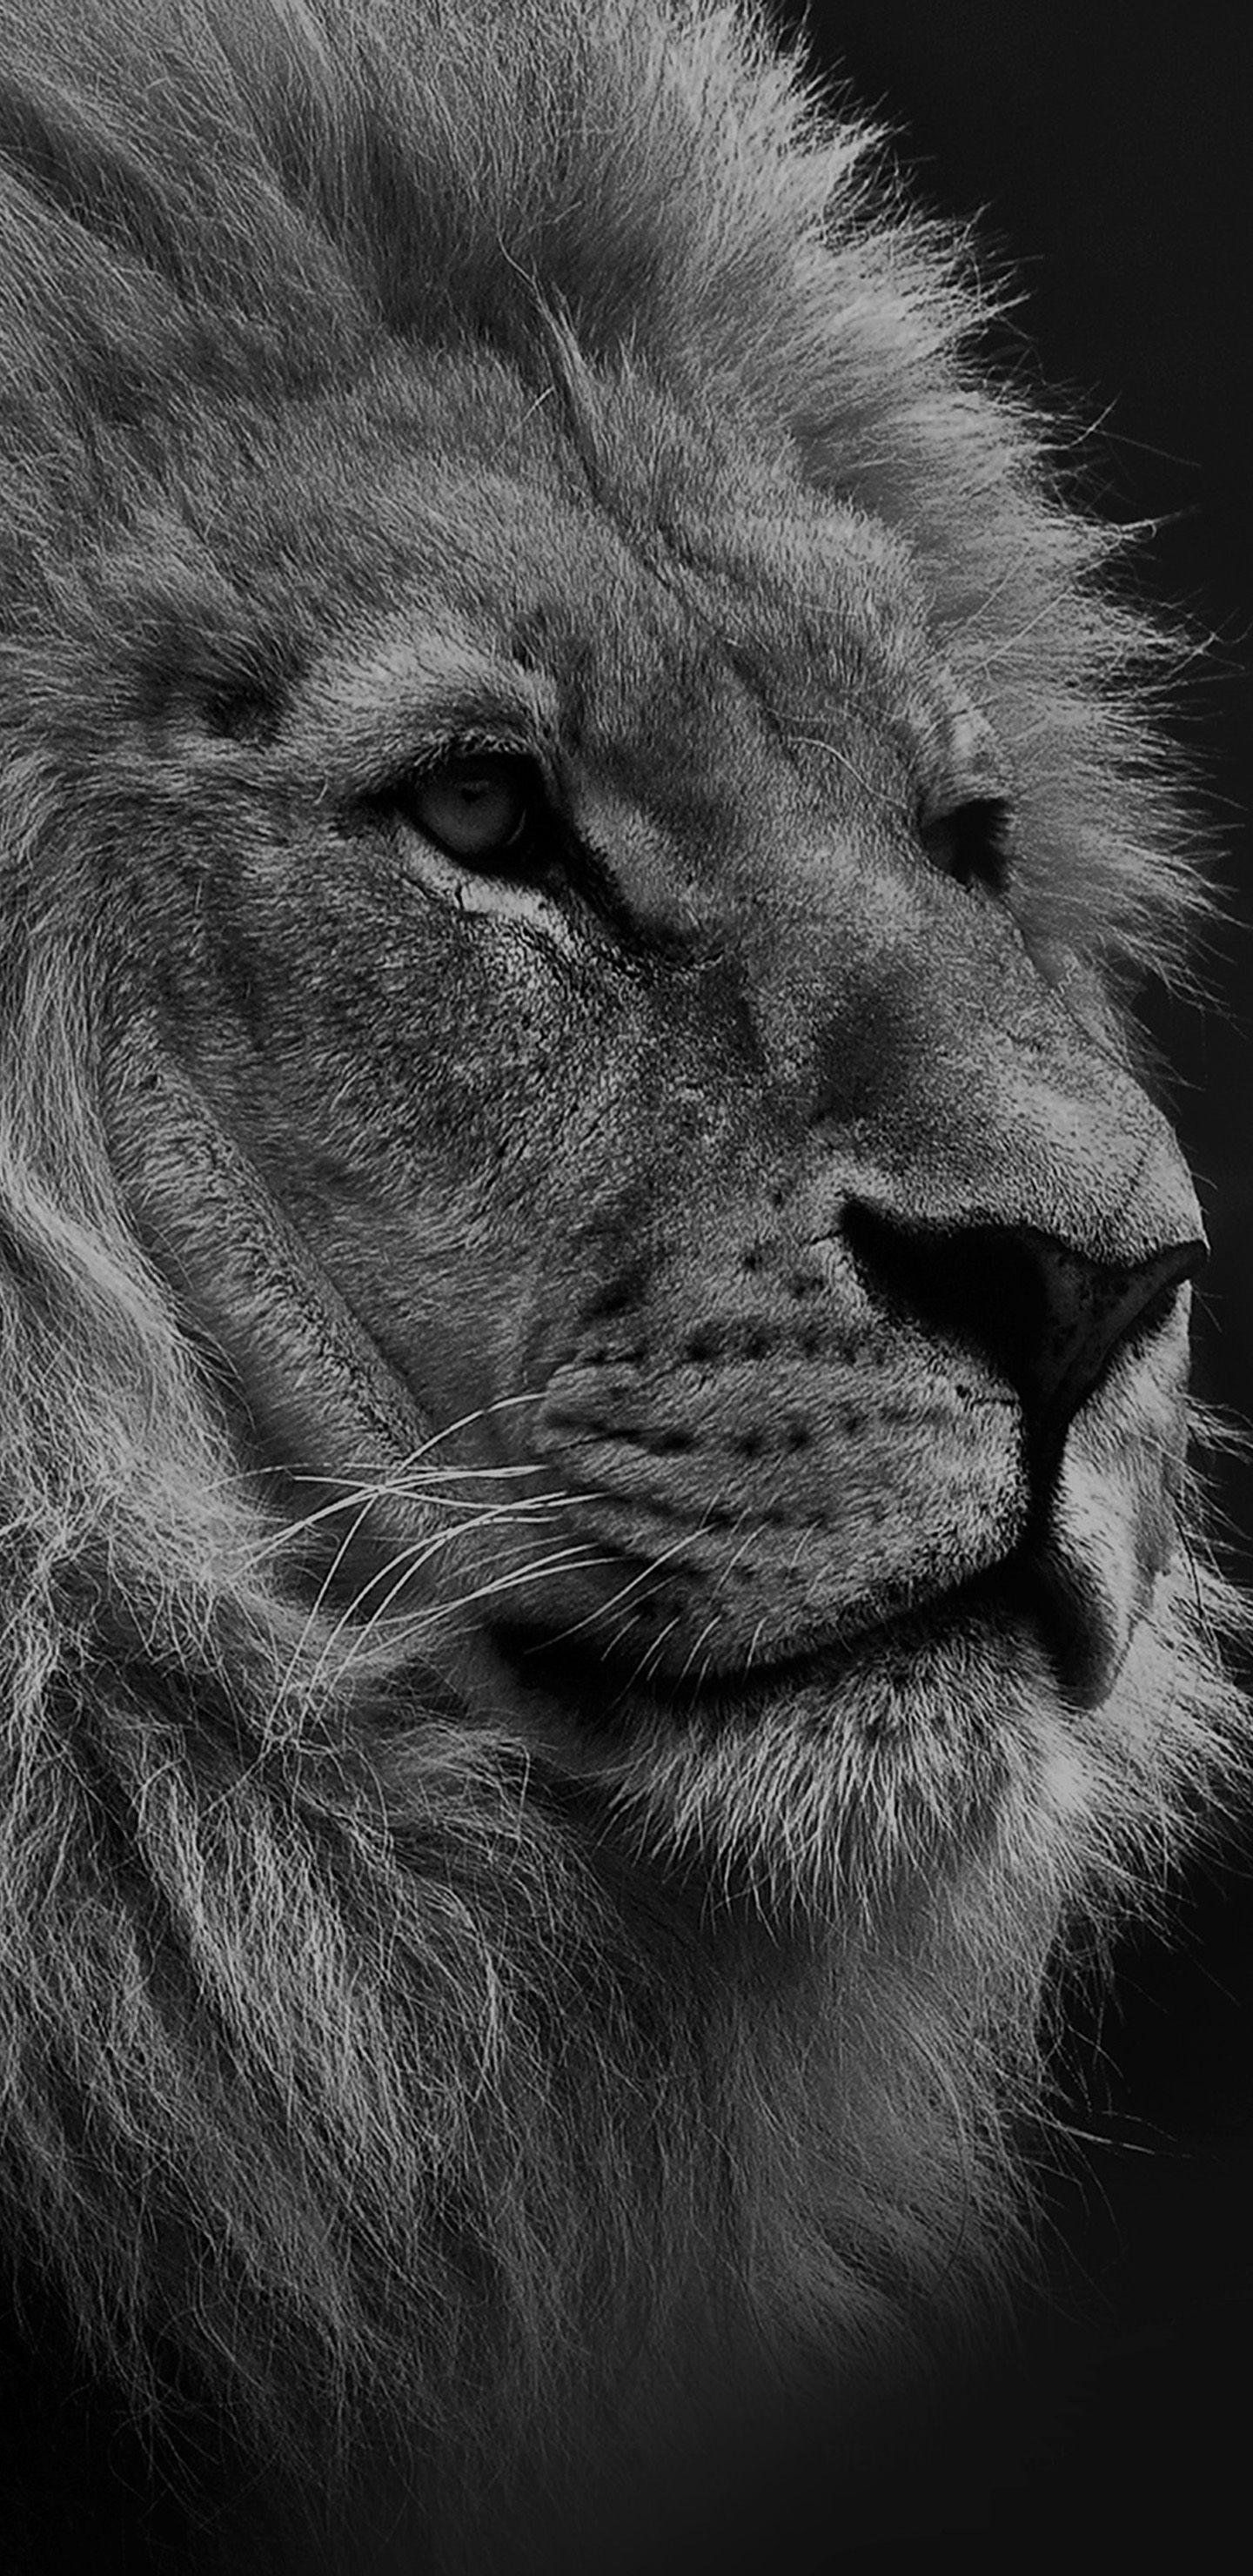 Black and white photo of a lion's face. - The Lion King, lion